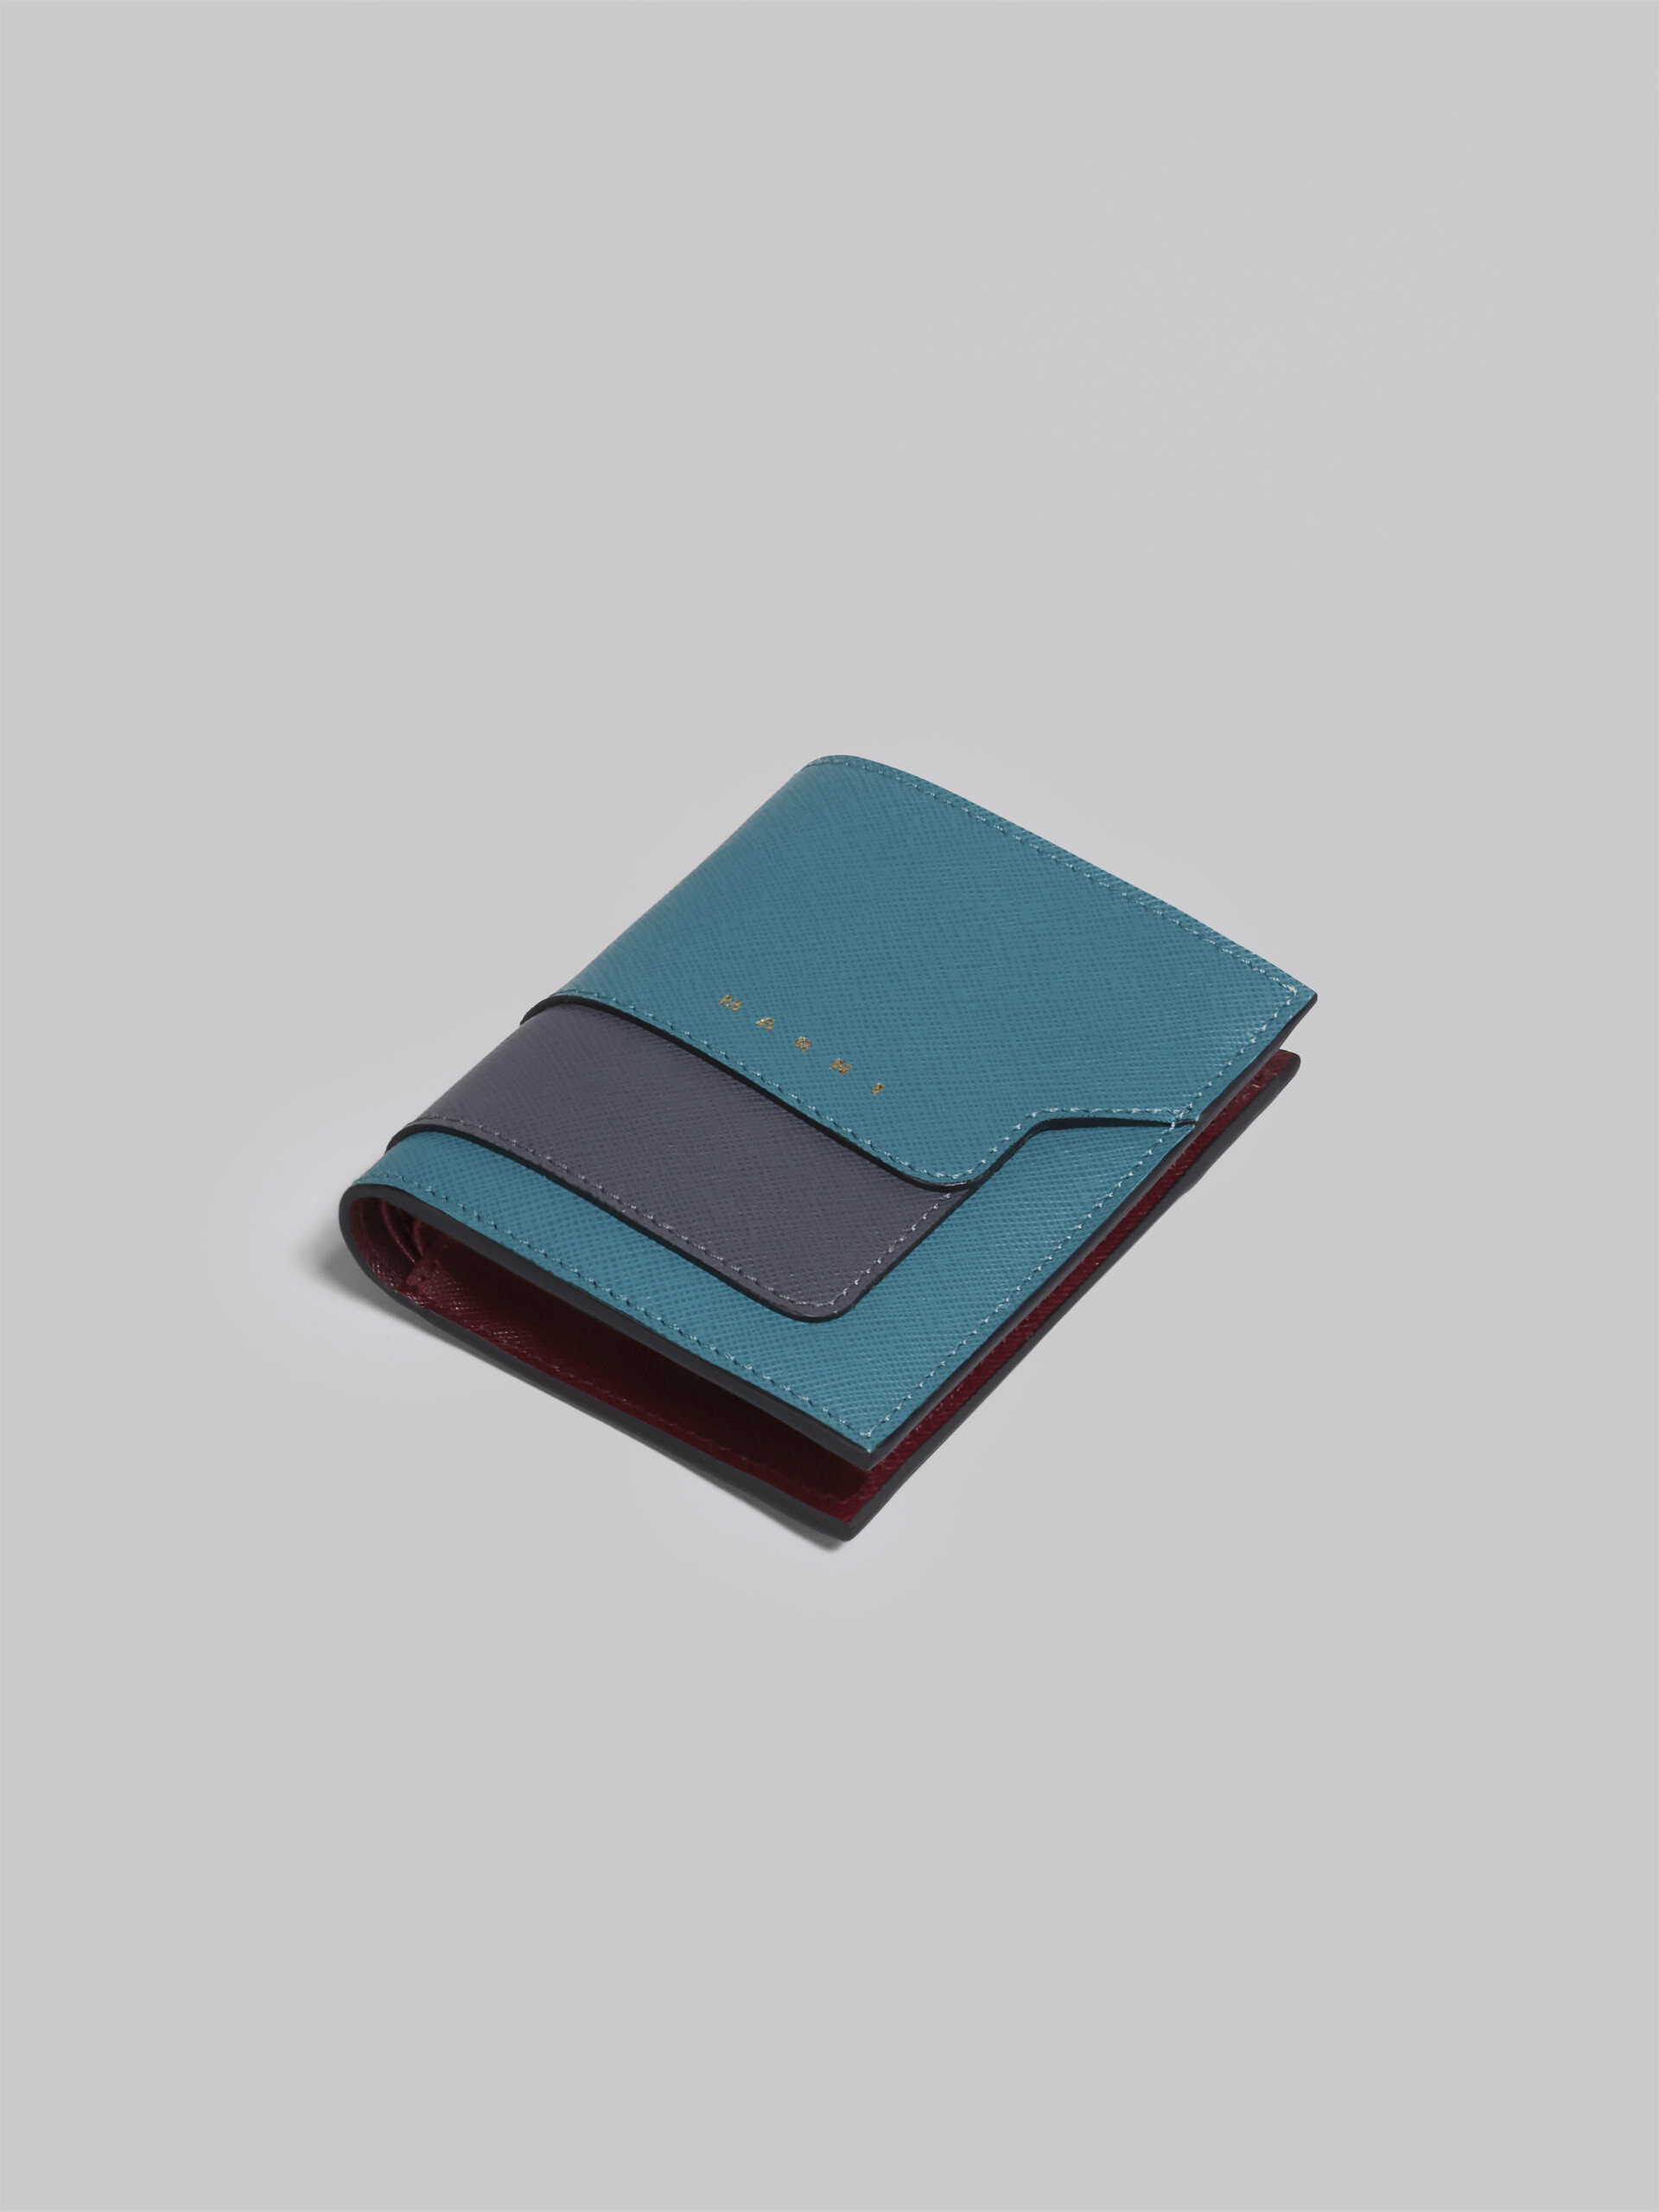 Blue grey and red bi-fold saffiano wallet - Wallets - Image 5